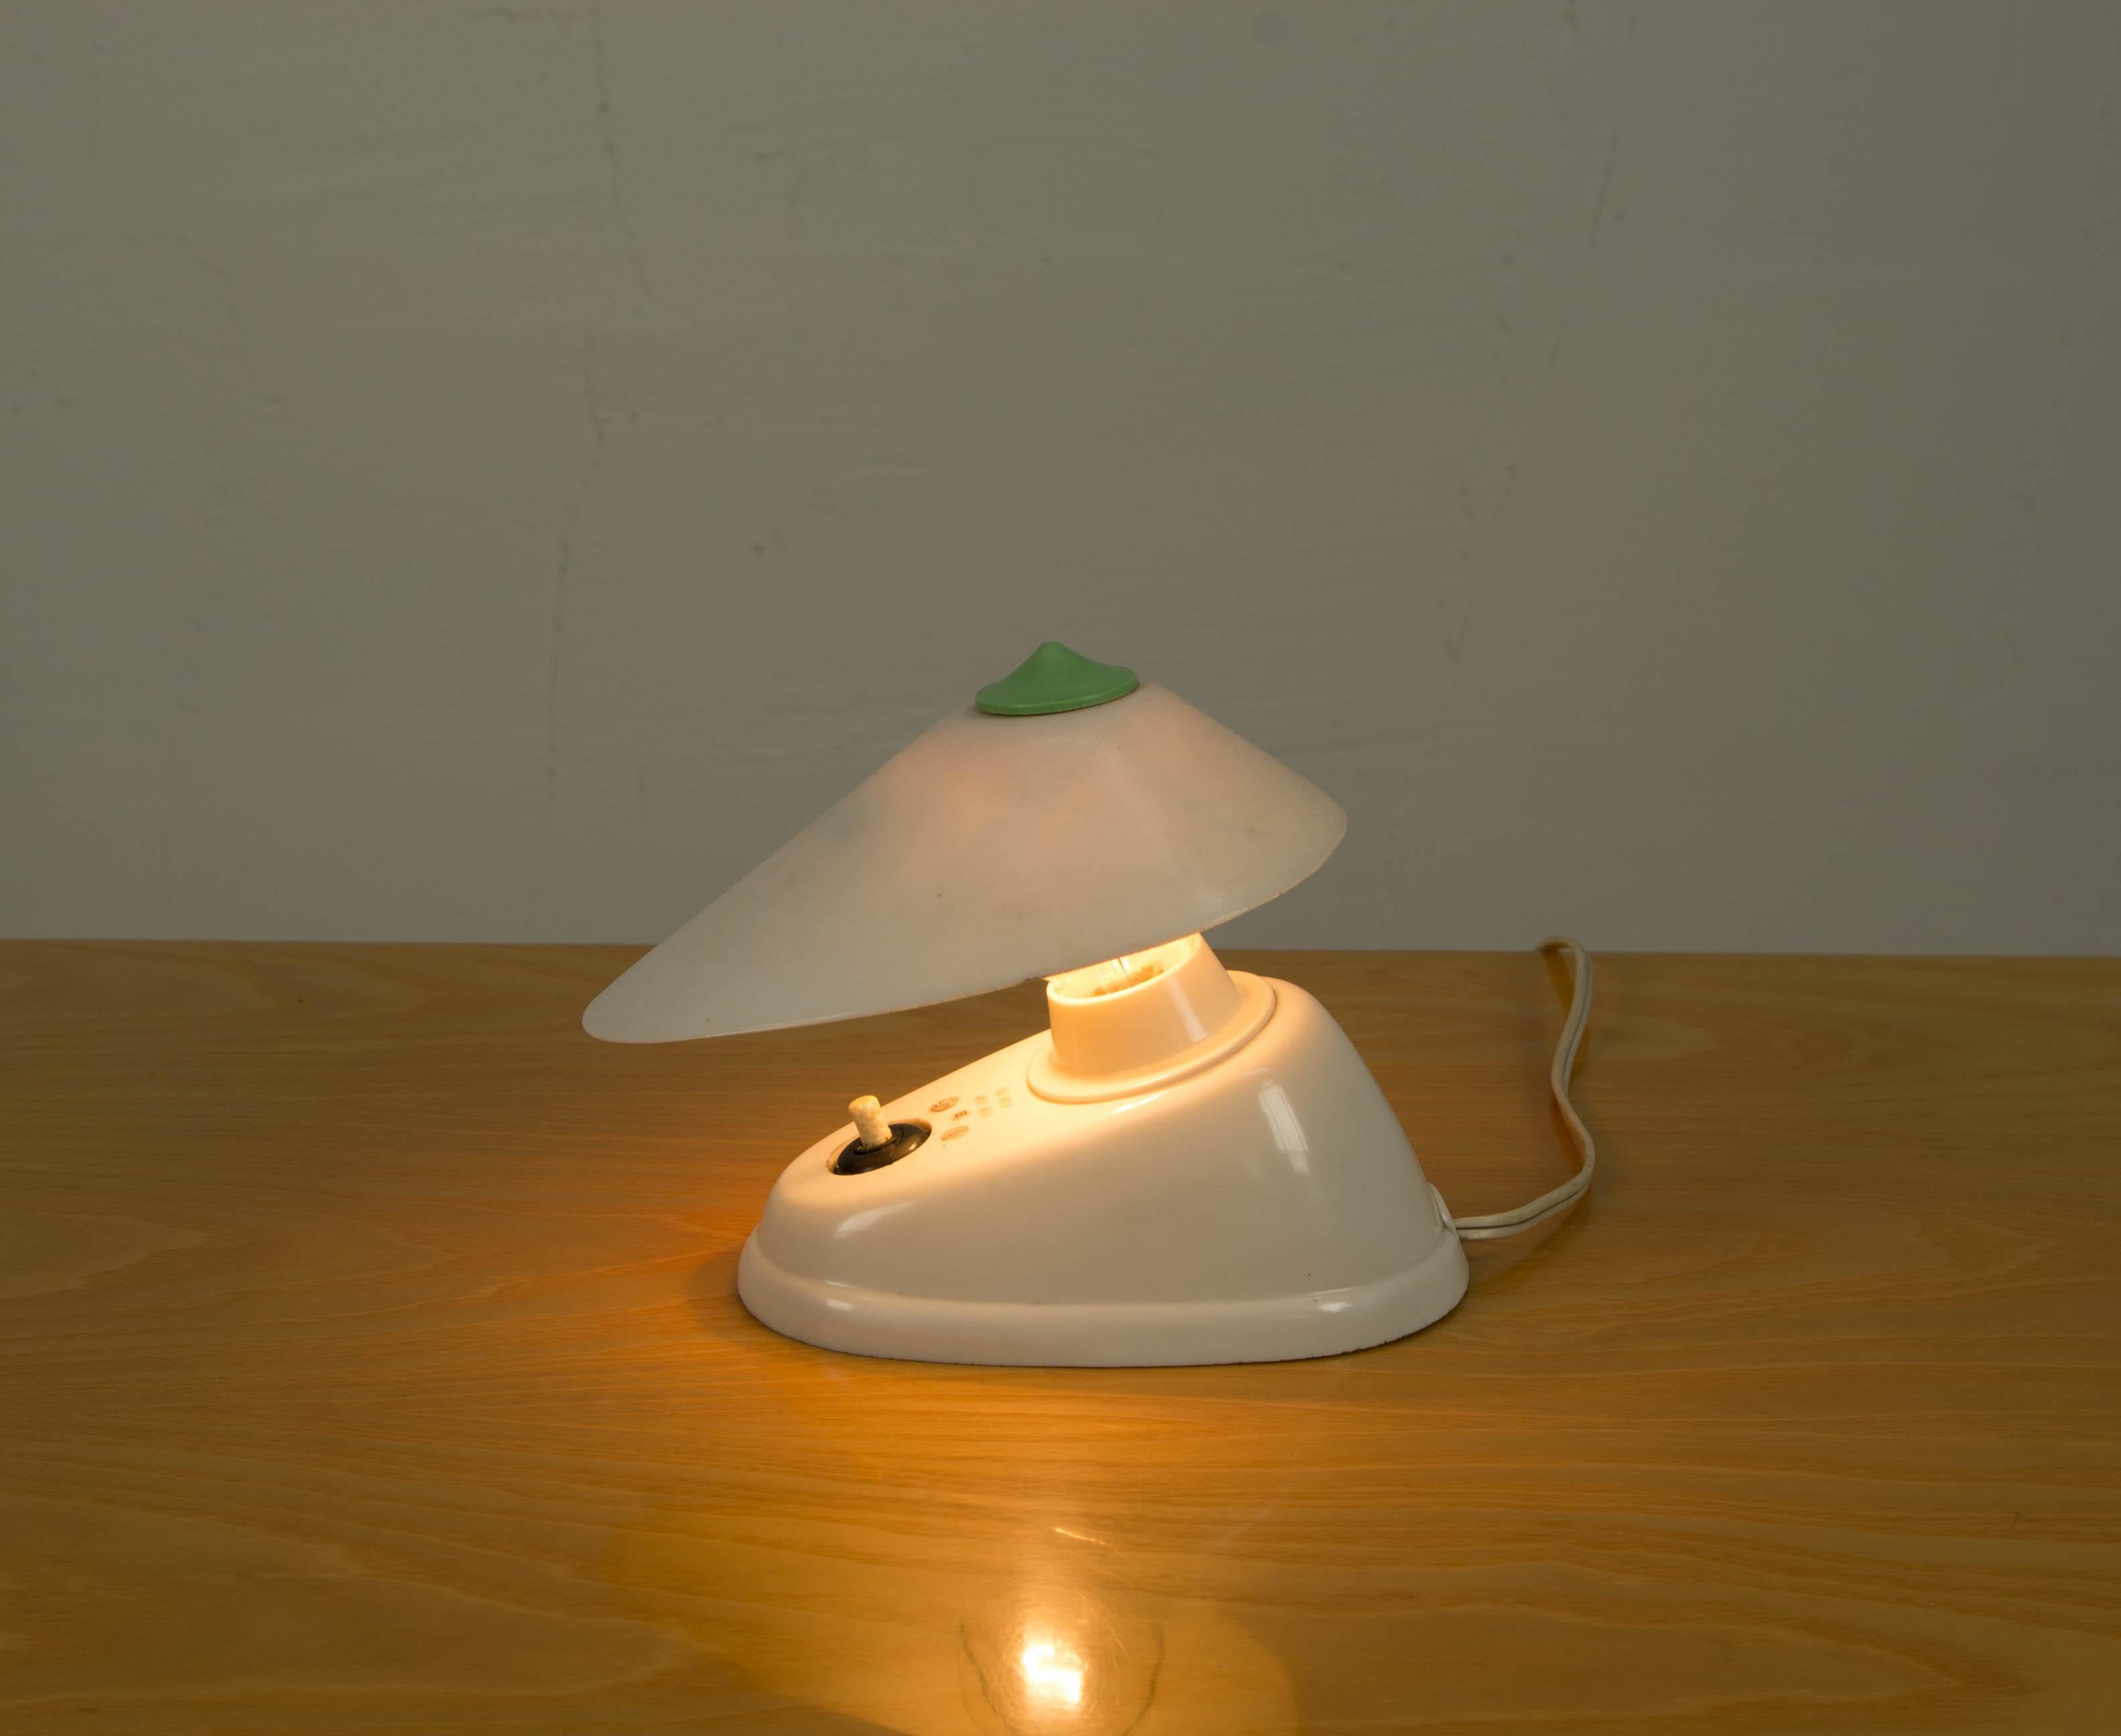 Small bakelite table or wall lamp with adjustable shade. Good original condition.